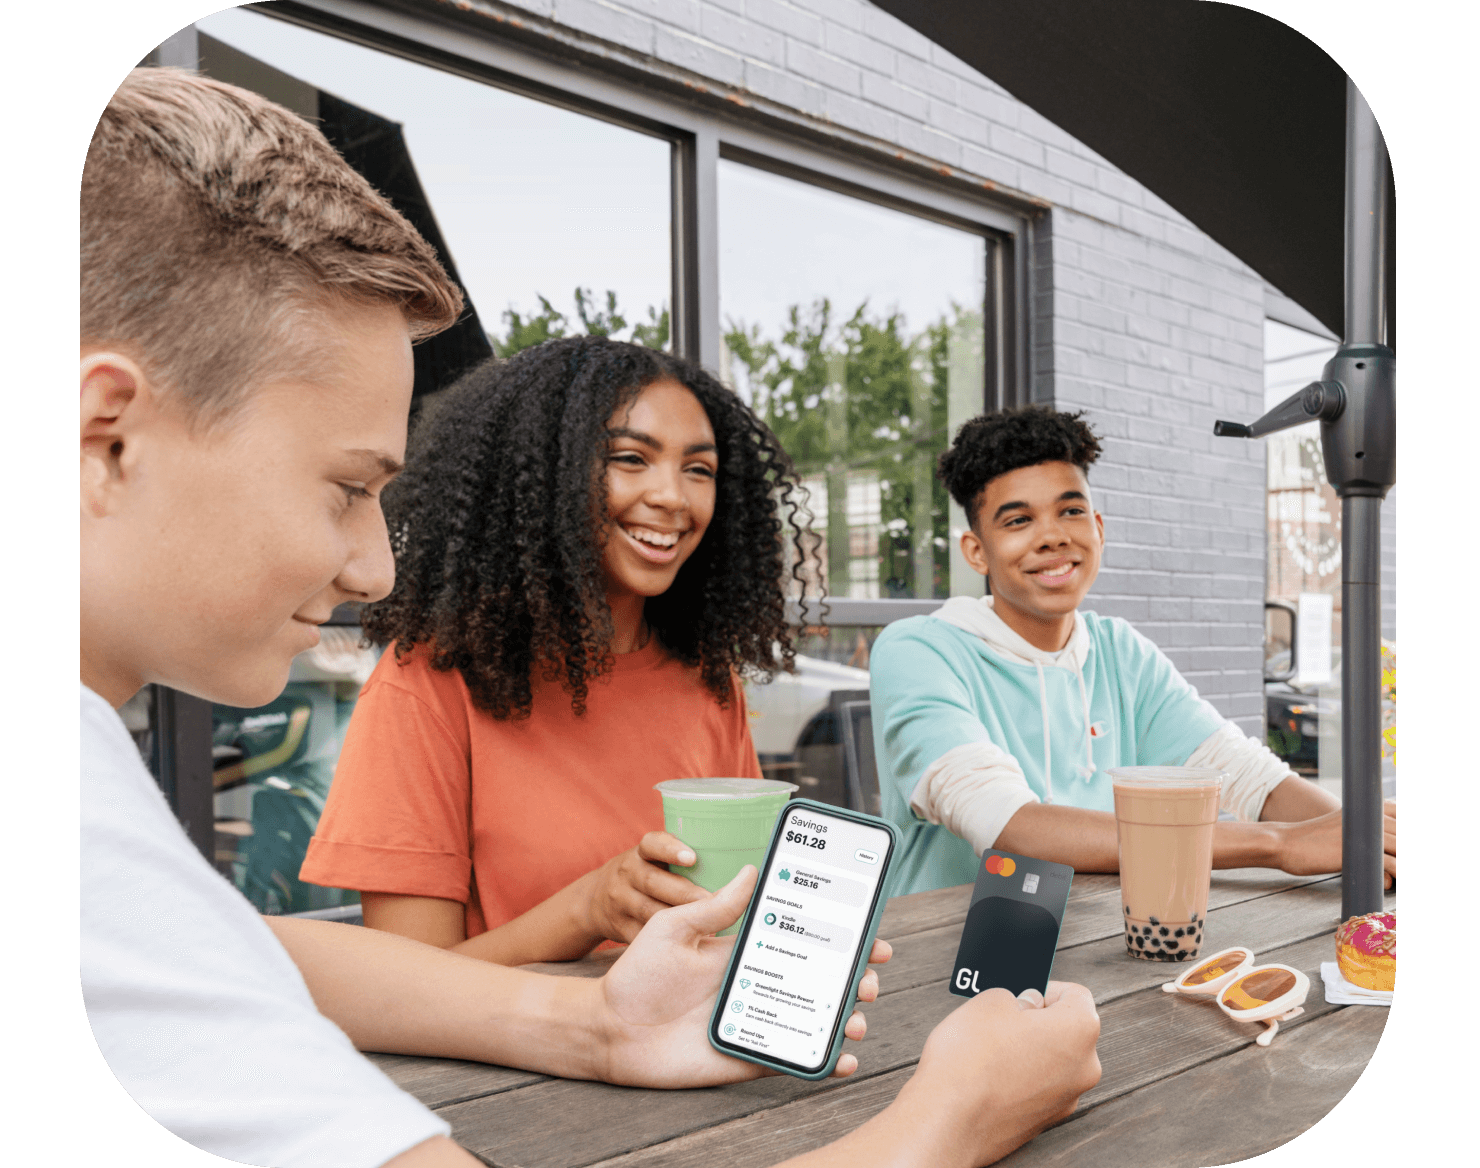 Teens referring friends to Greenlight the debit card for teens company